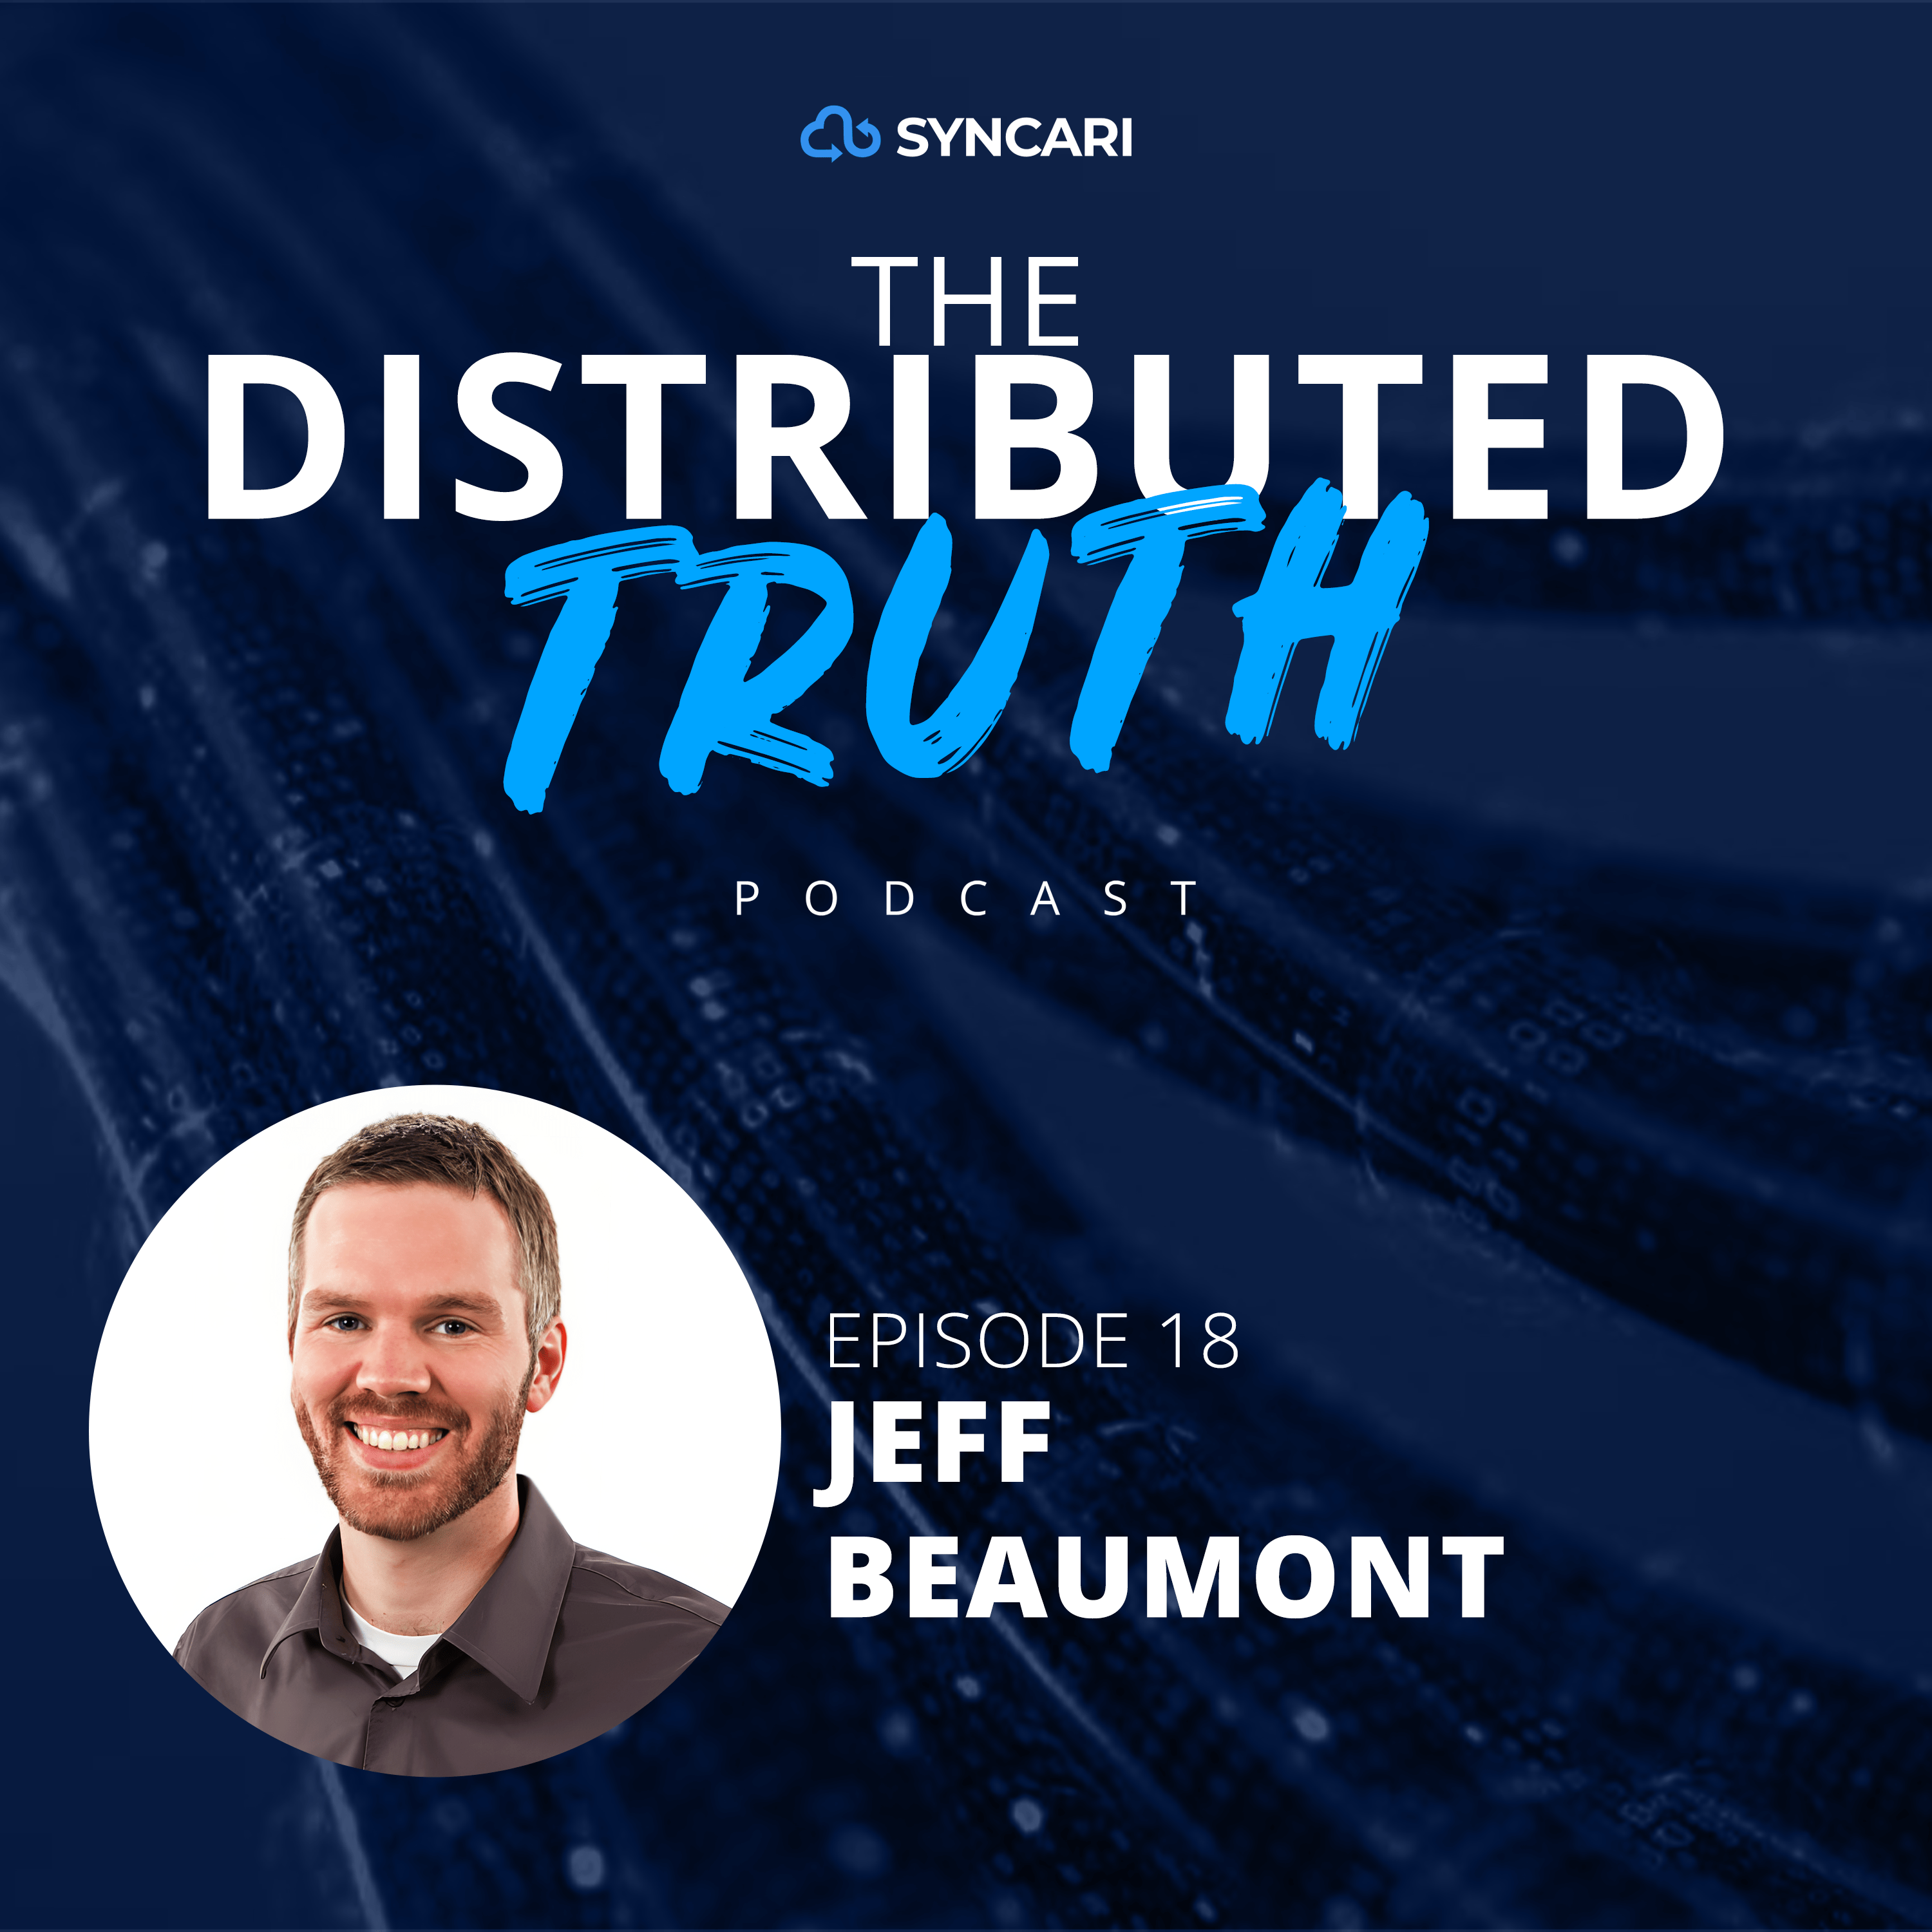 The Customer 360 Conundrum: Everyone Wants What No One Has, with Jeff Beaumont